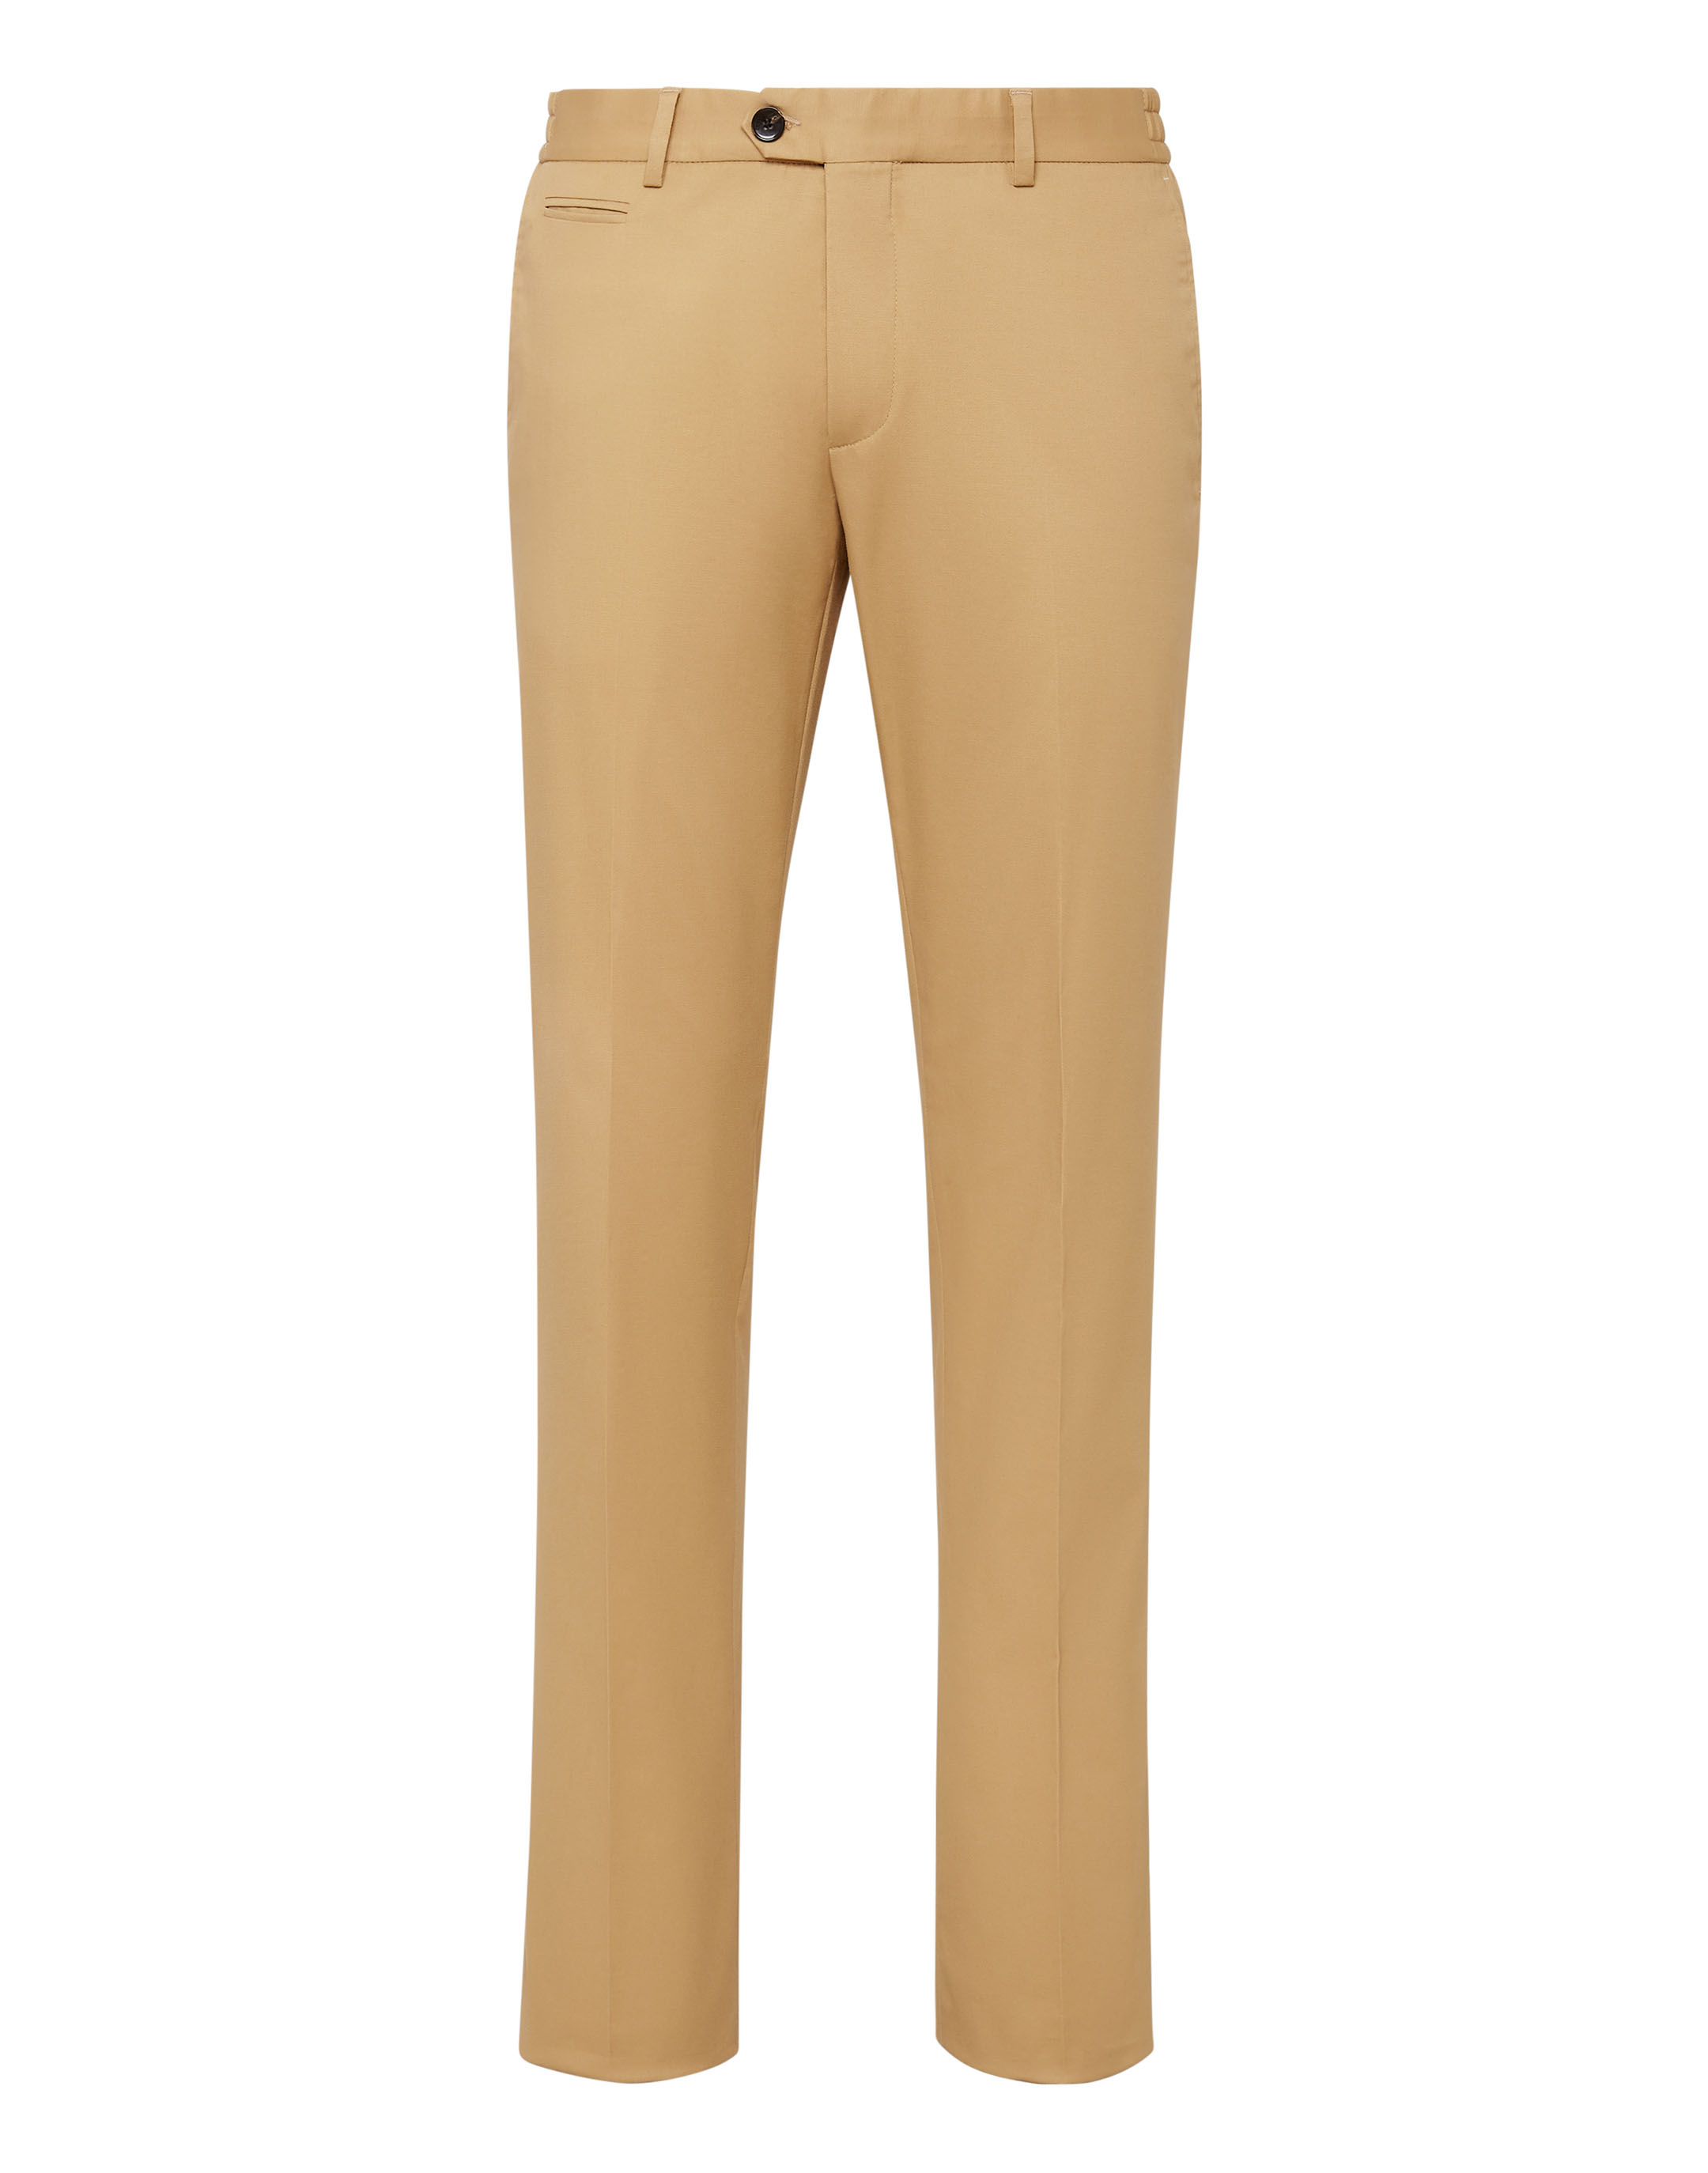 Men's Stretch Cotton Tailored Pants | Happy Chef